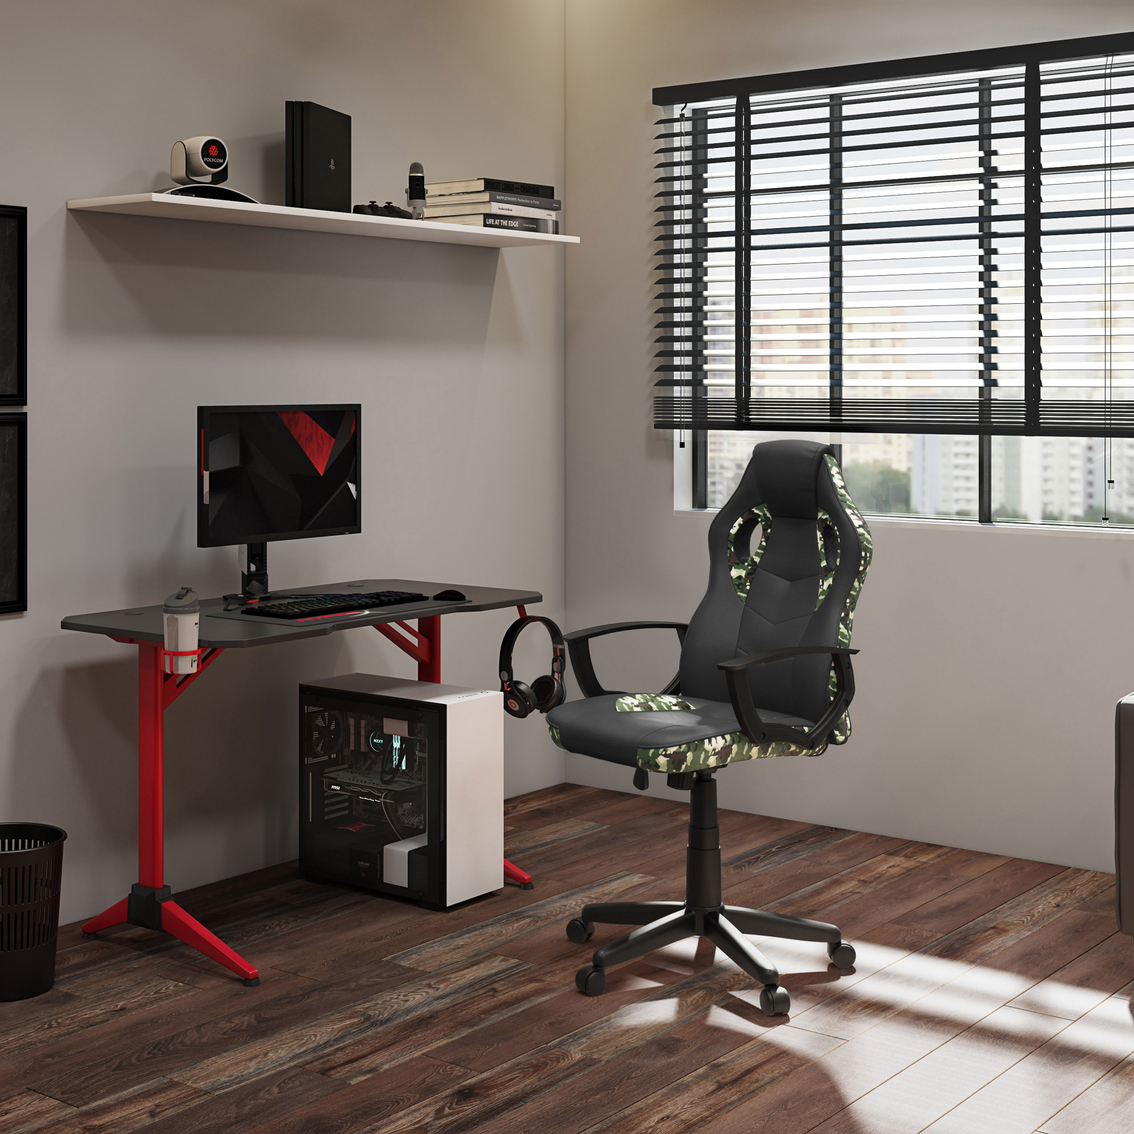 Corliving Mad Dog Black and Camo Gaming Chair - Image 5 of 5